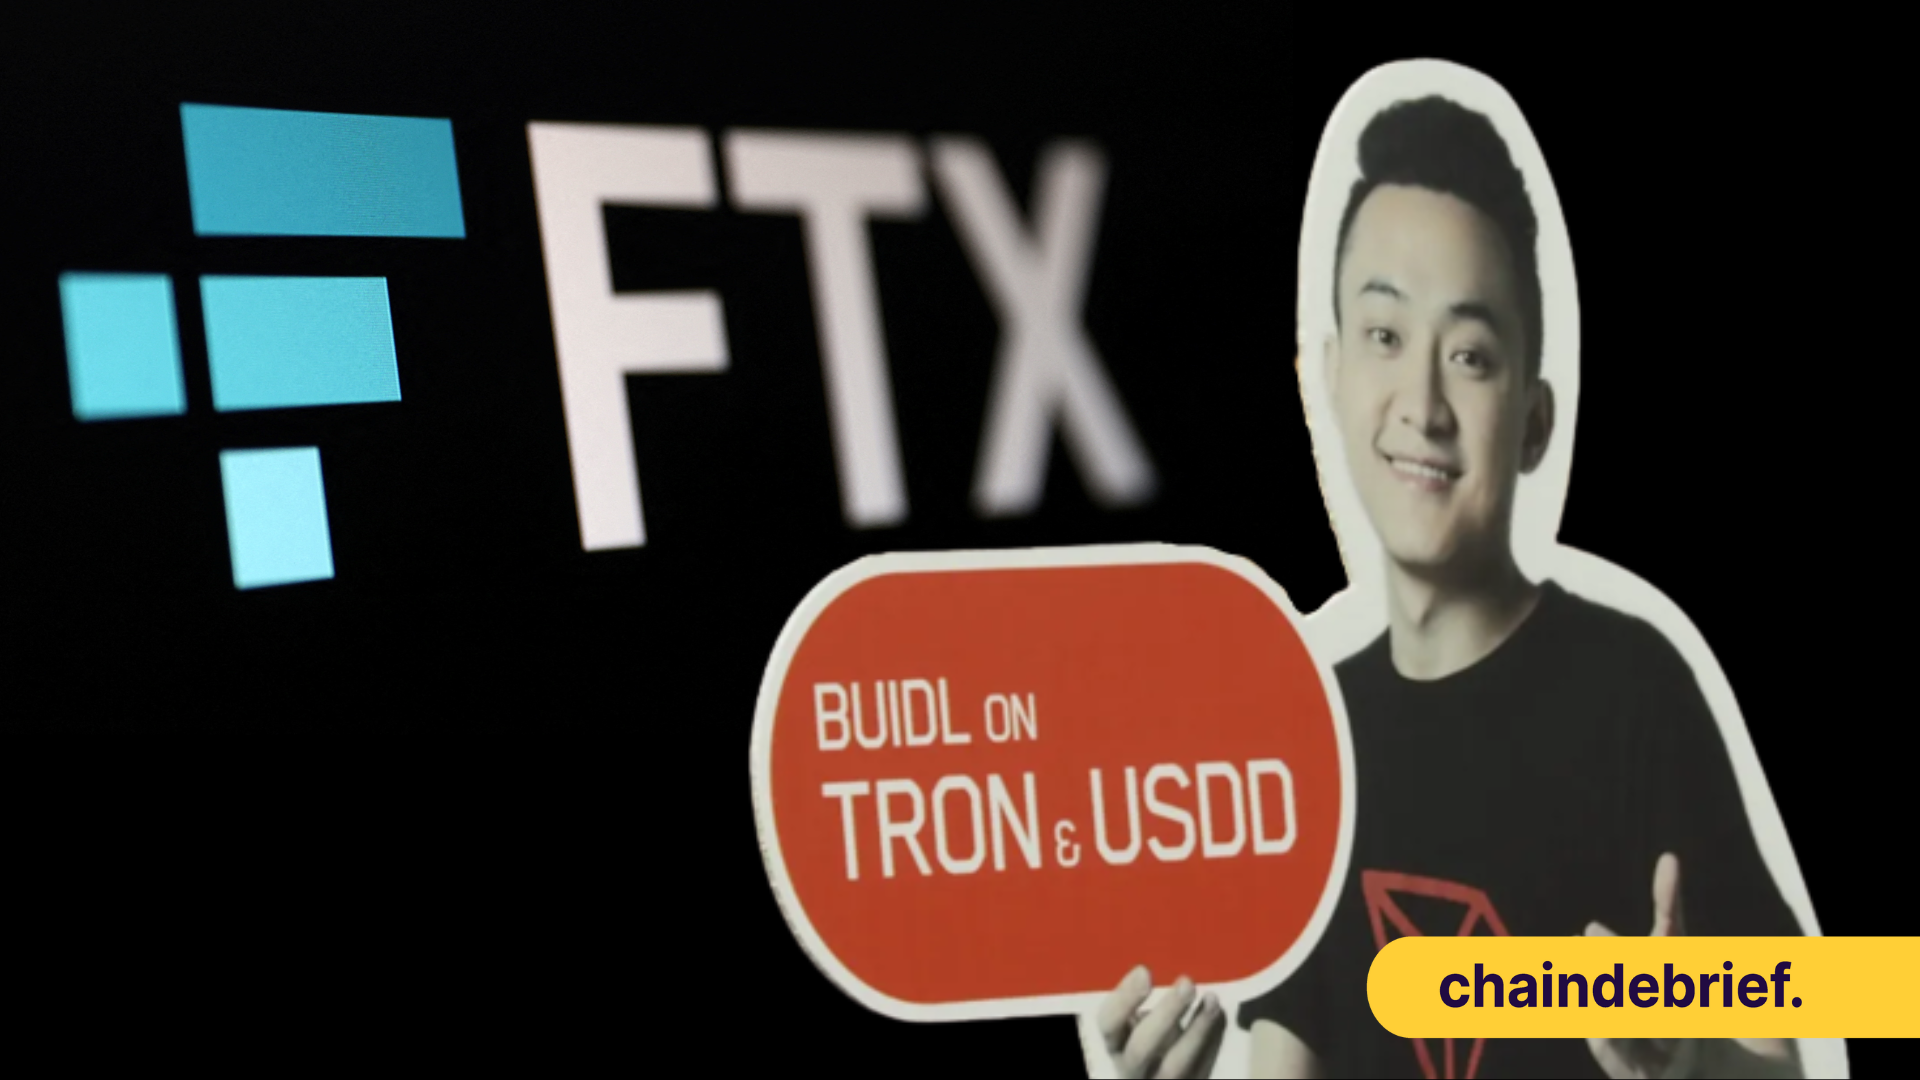 Could Justin Sun Save The Crypto Market Or Does He Have A Hidden Agenda?